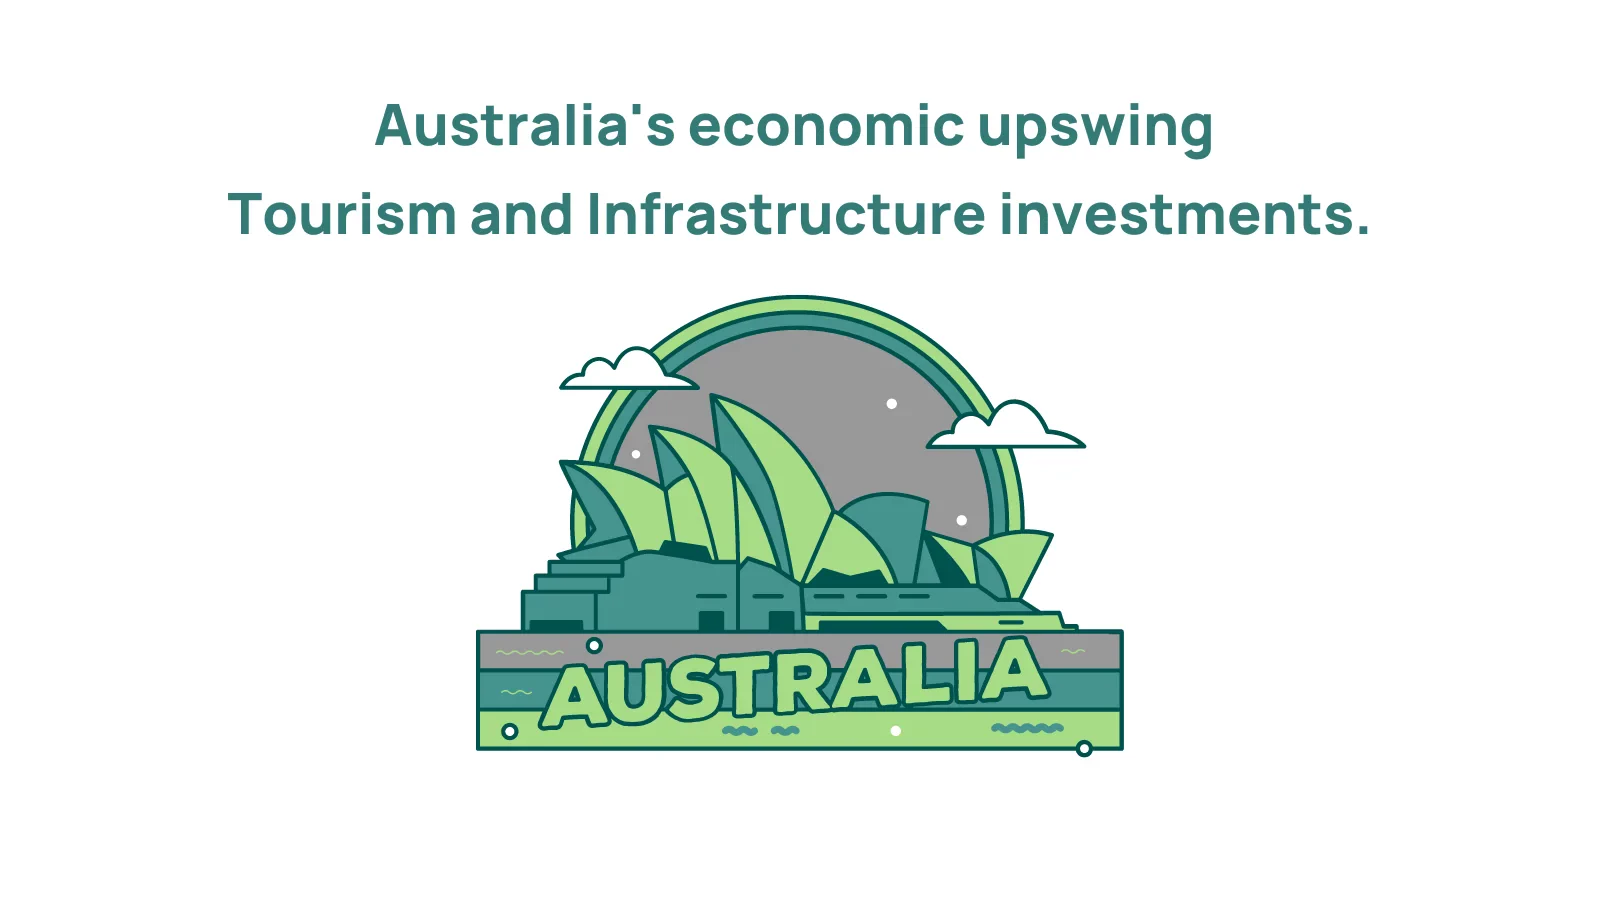 Tourism boom and infrastructure investments fuel Australia economic upswing